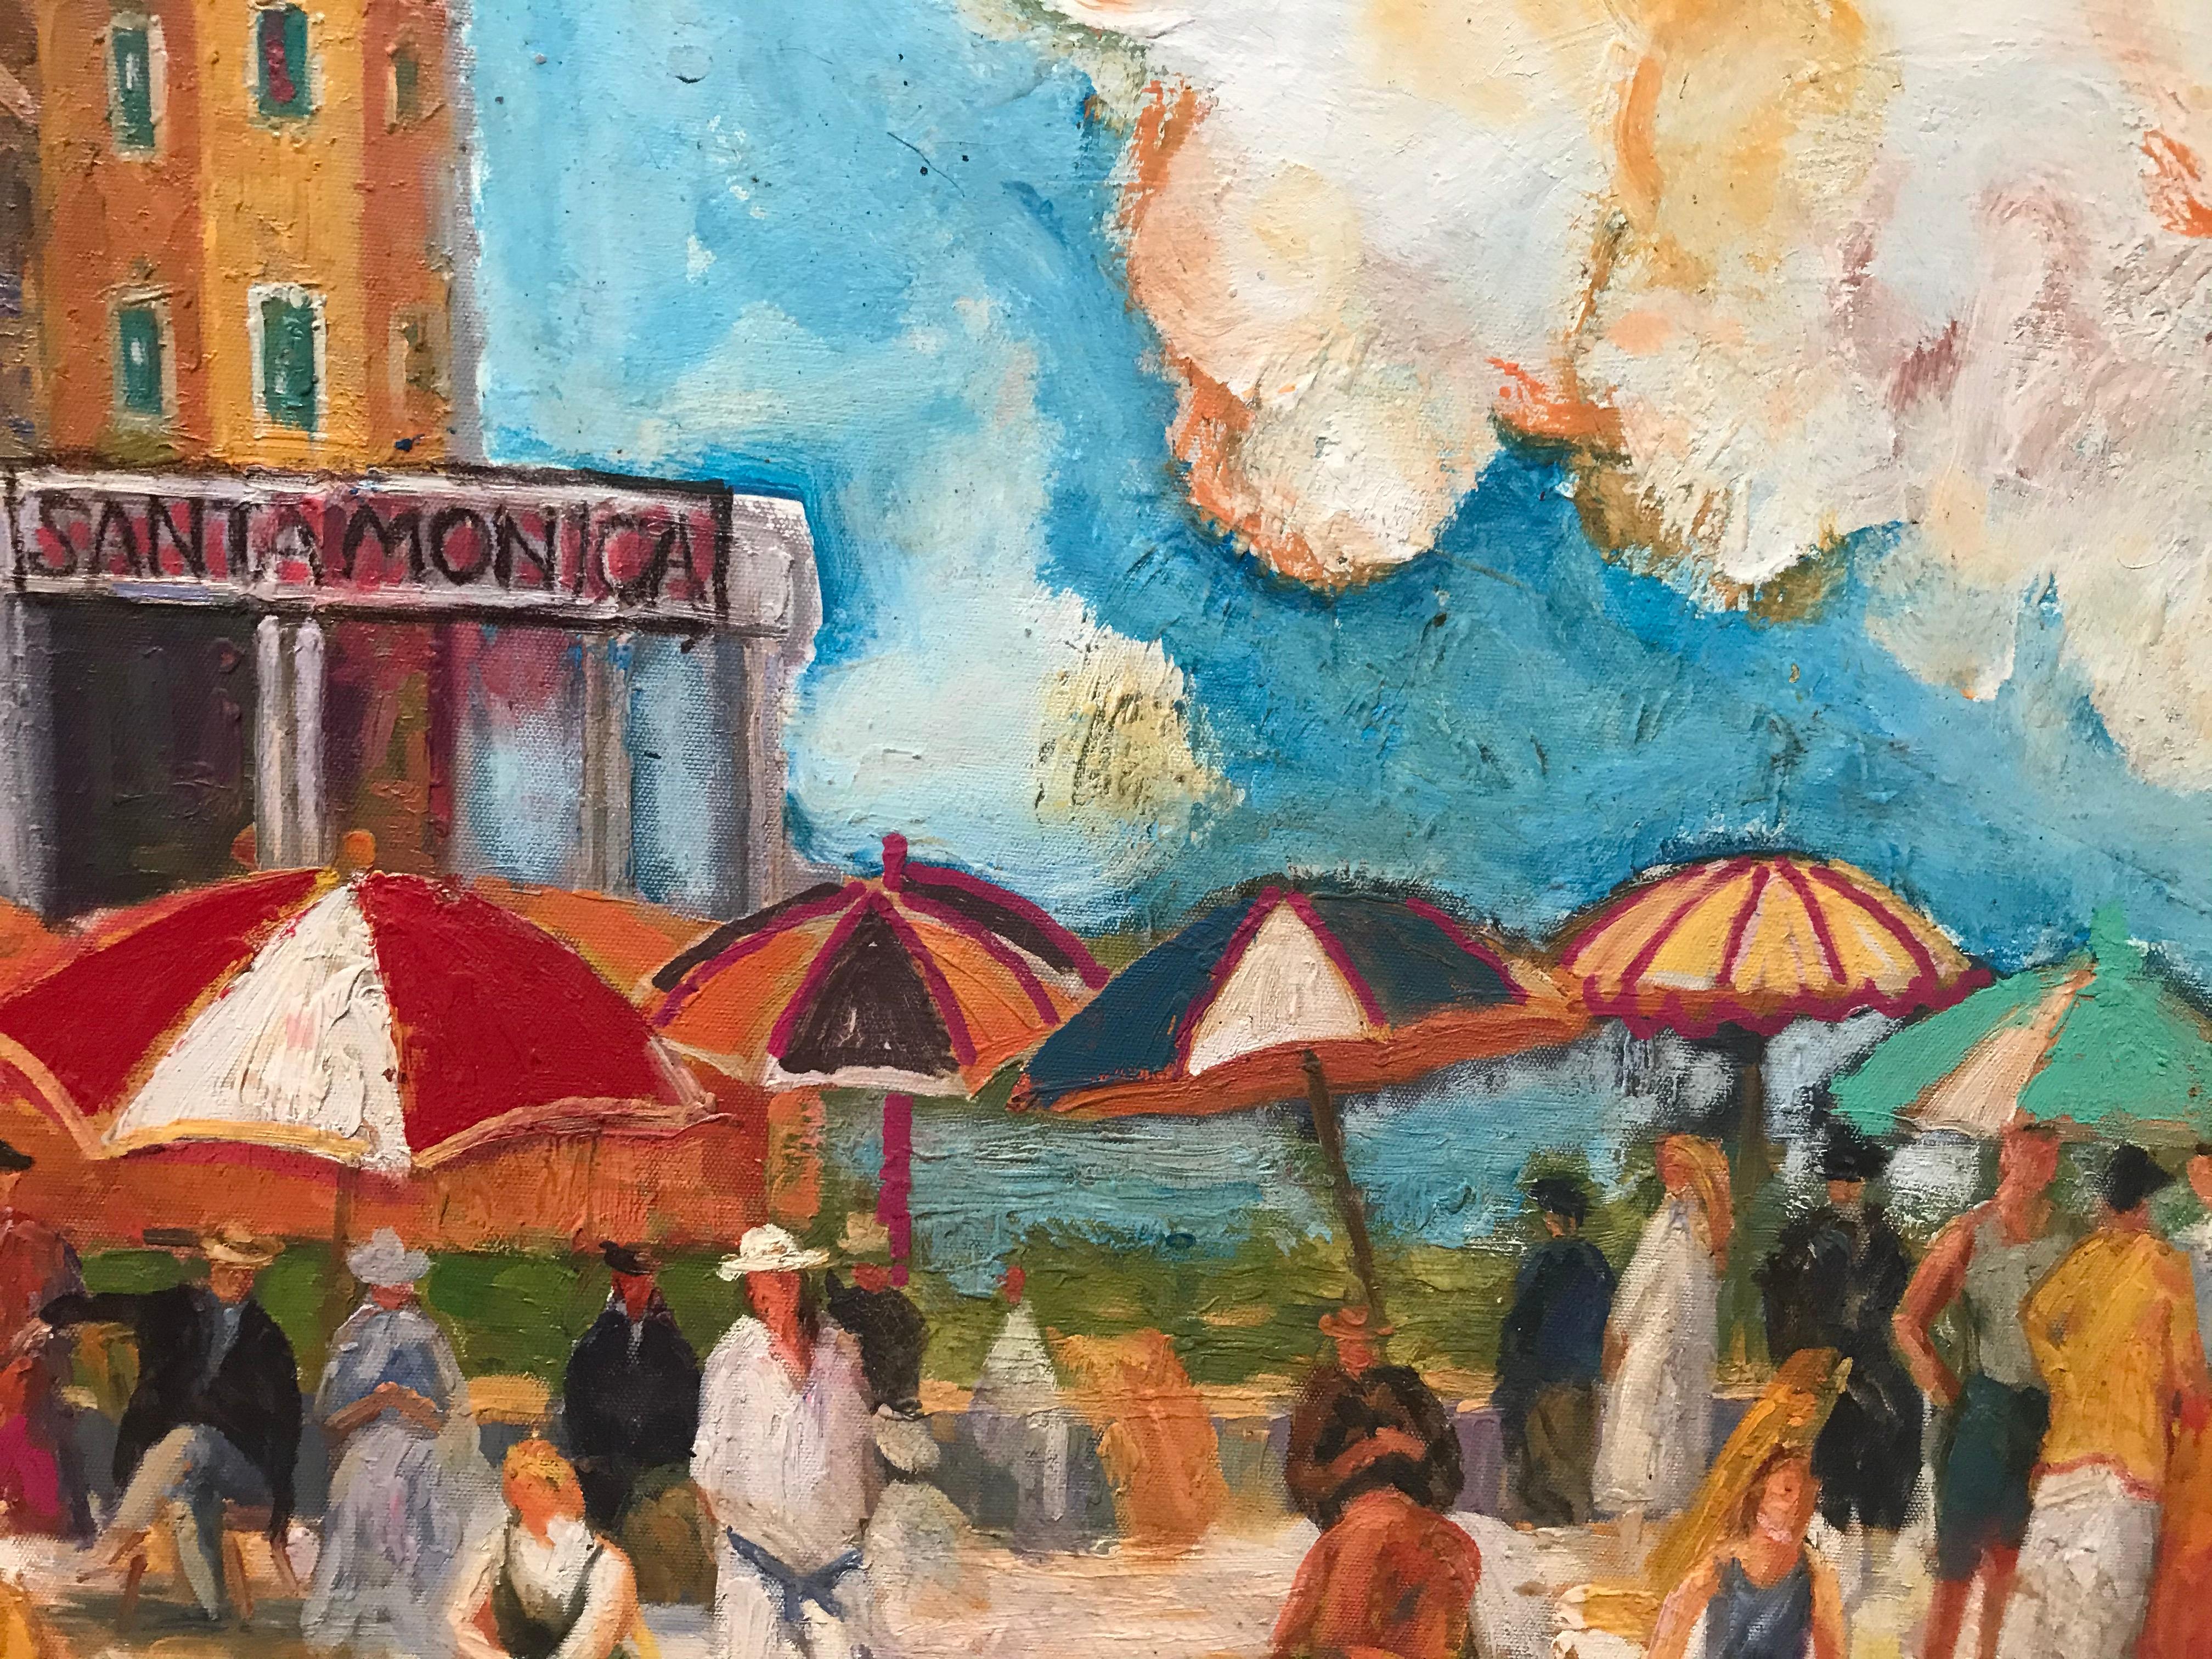 This artwork features an oil painting of the beach of Santa Monica. The artist depicts beachgoers and colorful sunshades on a cloudy day. The overall impression is joyful, like a Sunday get-together of family and friends. 

Dan Shupe was born in